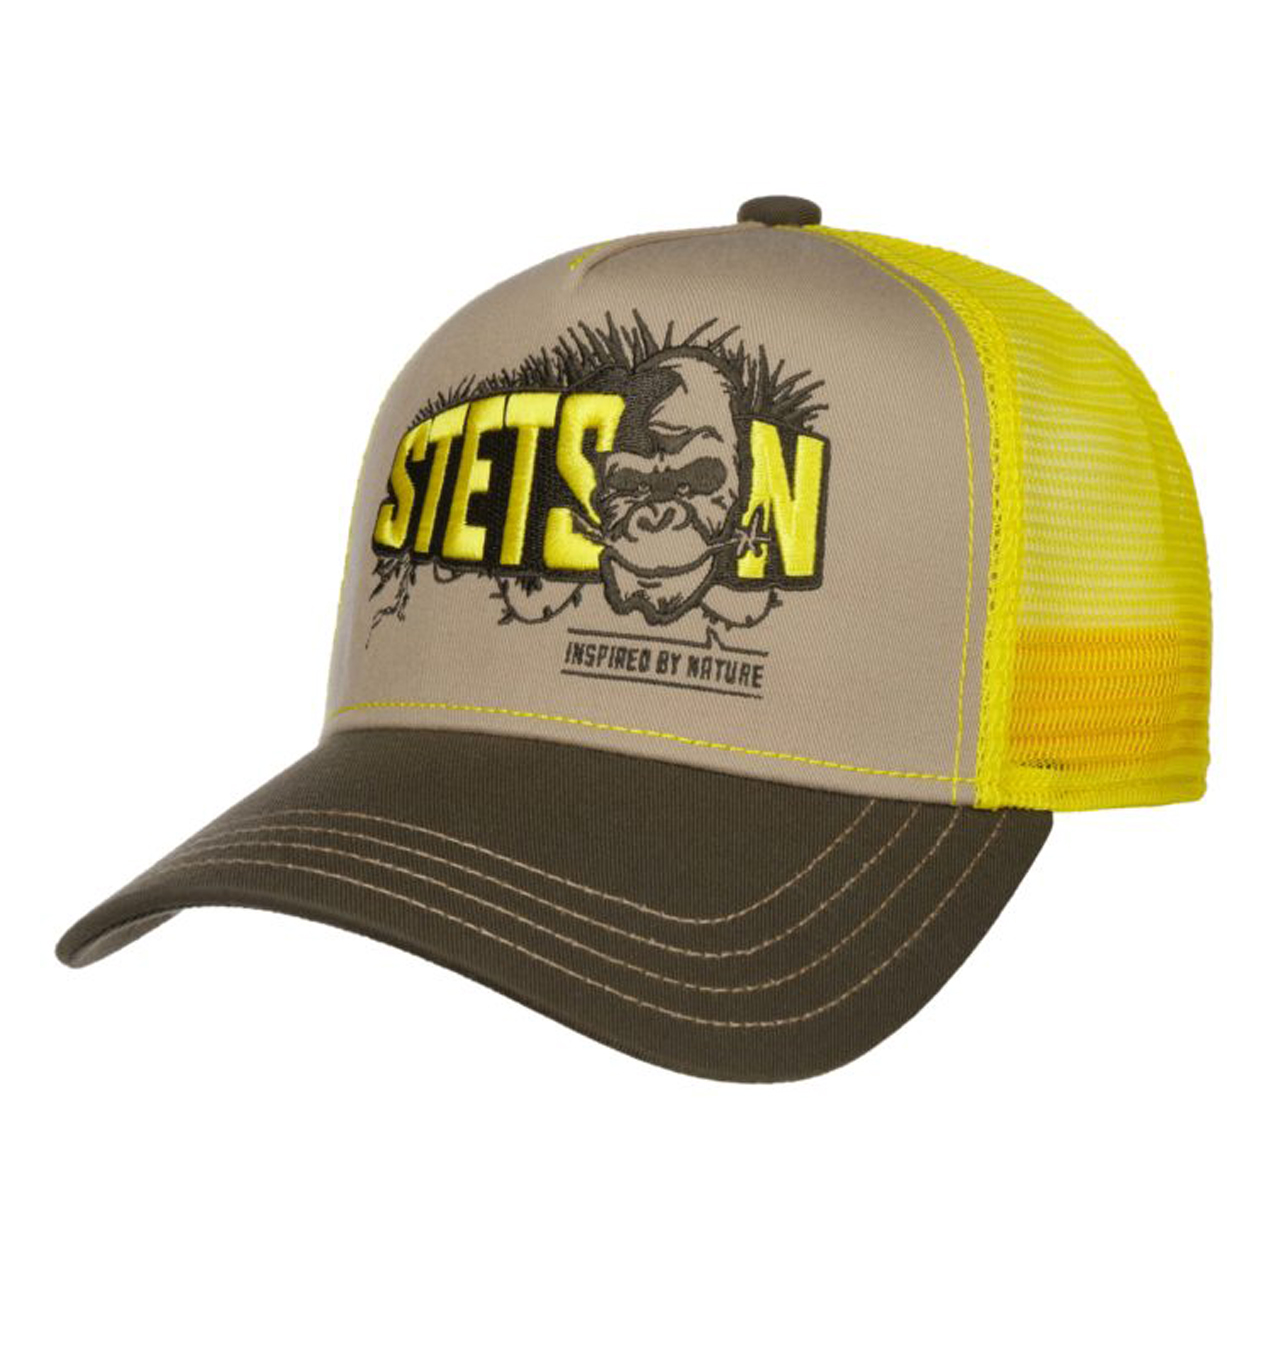 Stetson - Ape Inspired By Nature - Yellow-Grey